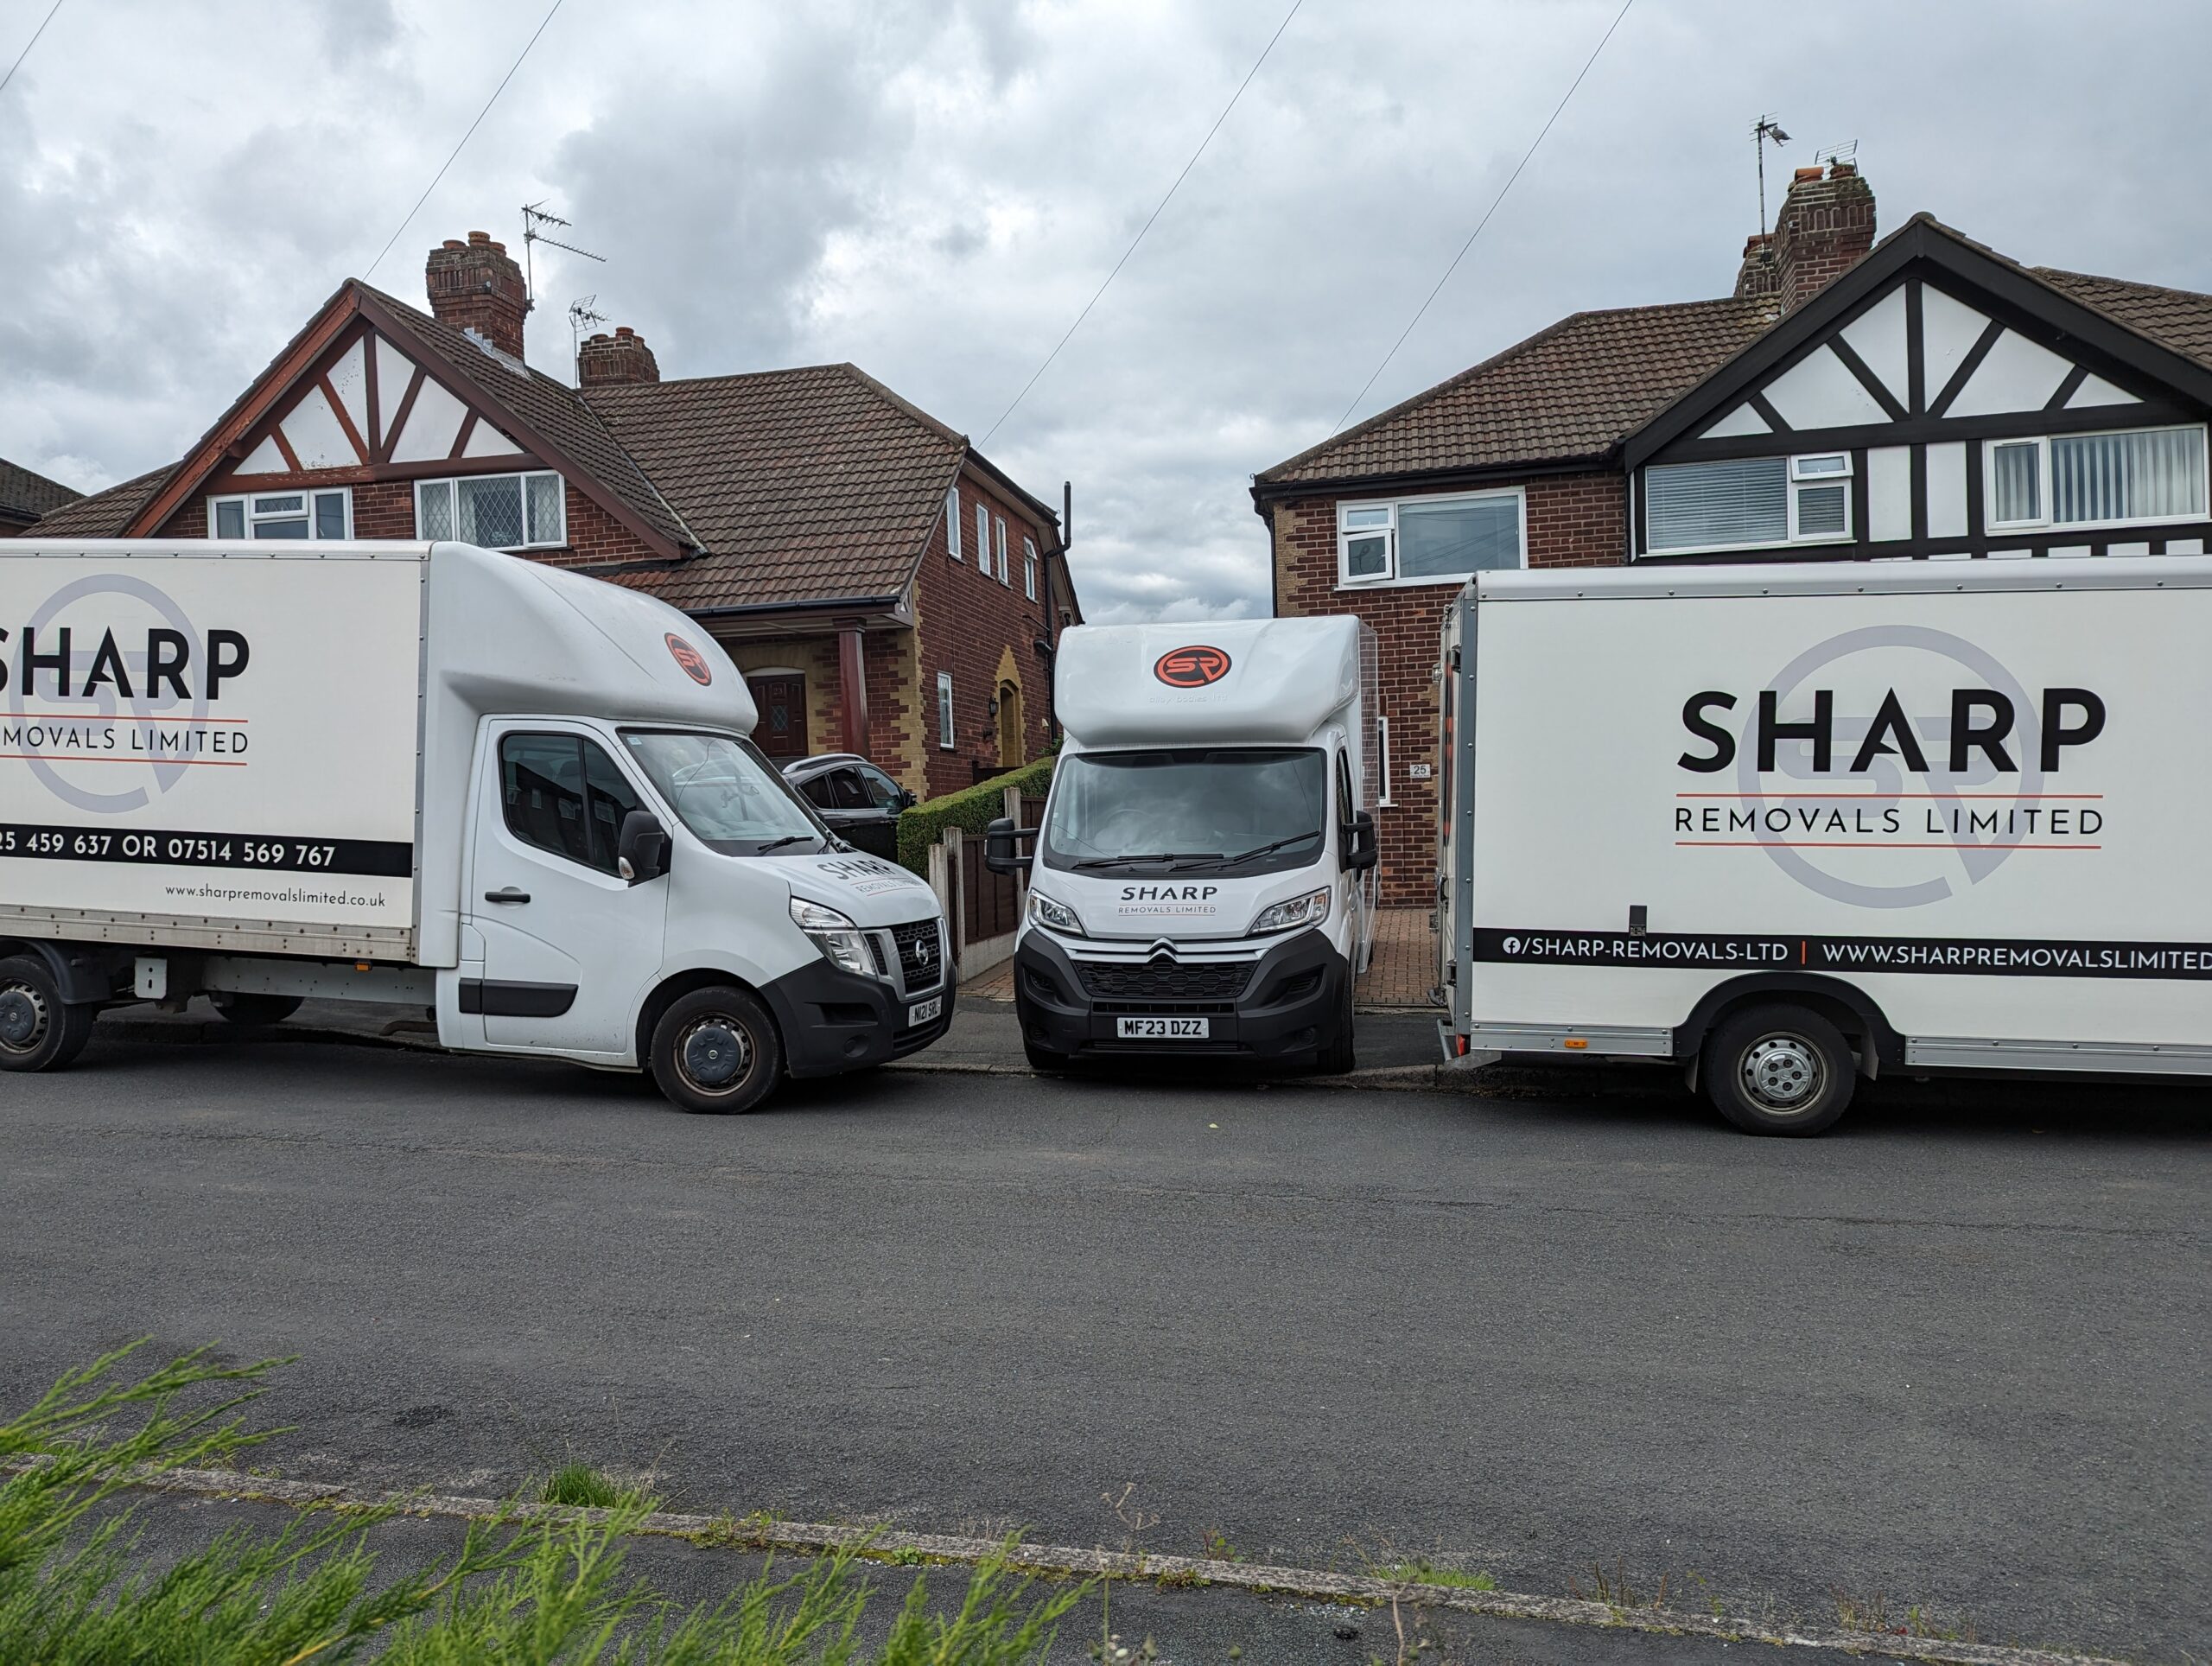 Sharp Removals Limited BBB Stockport